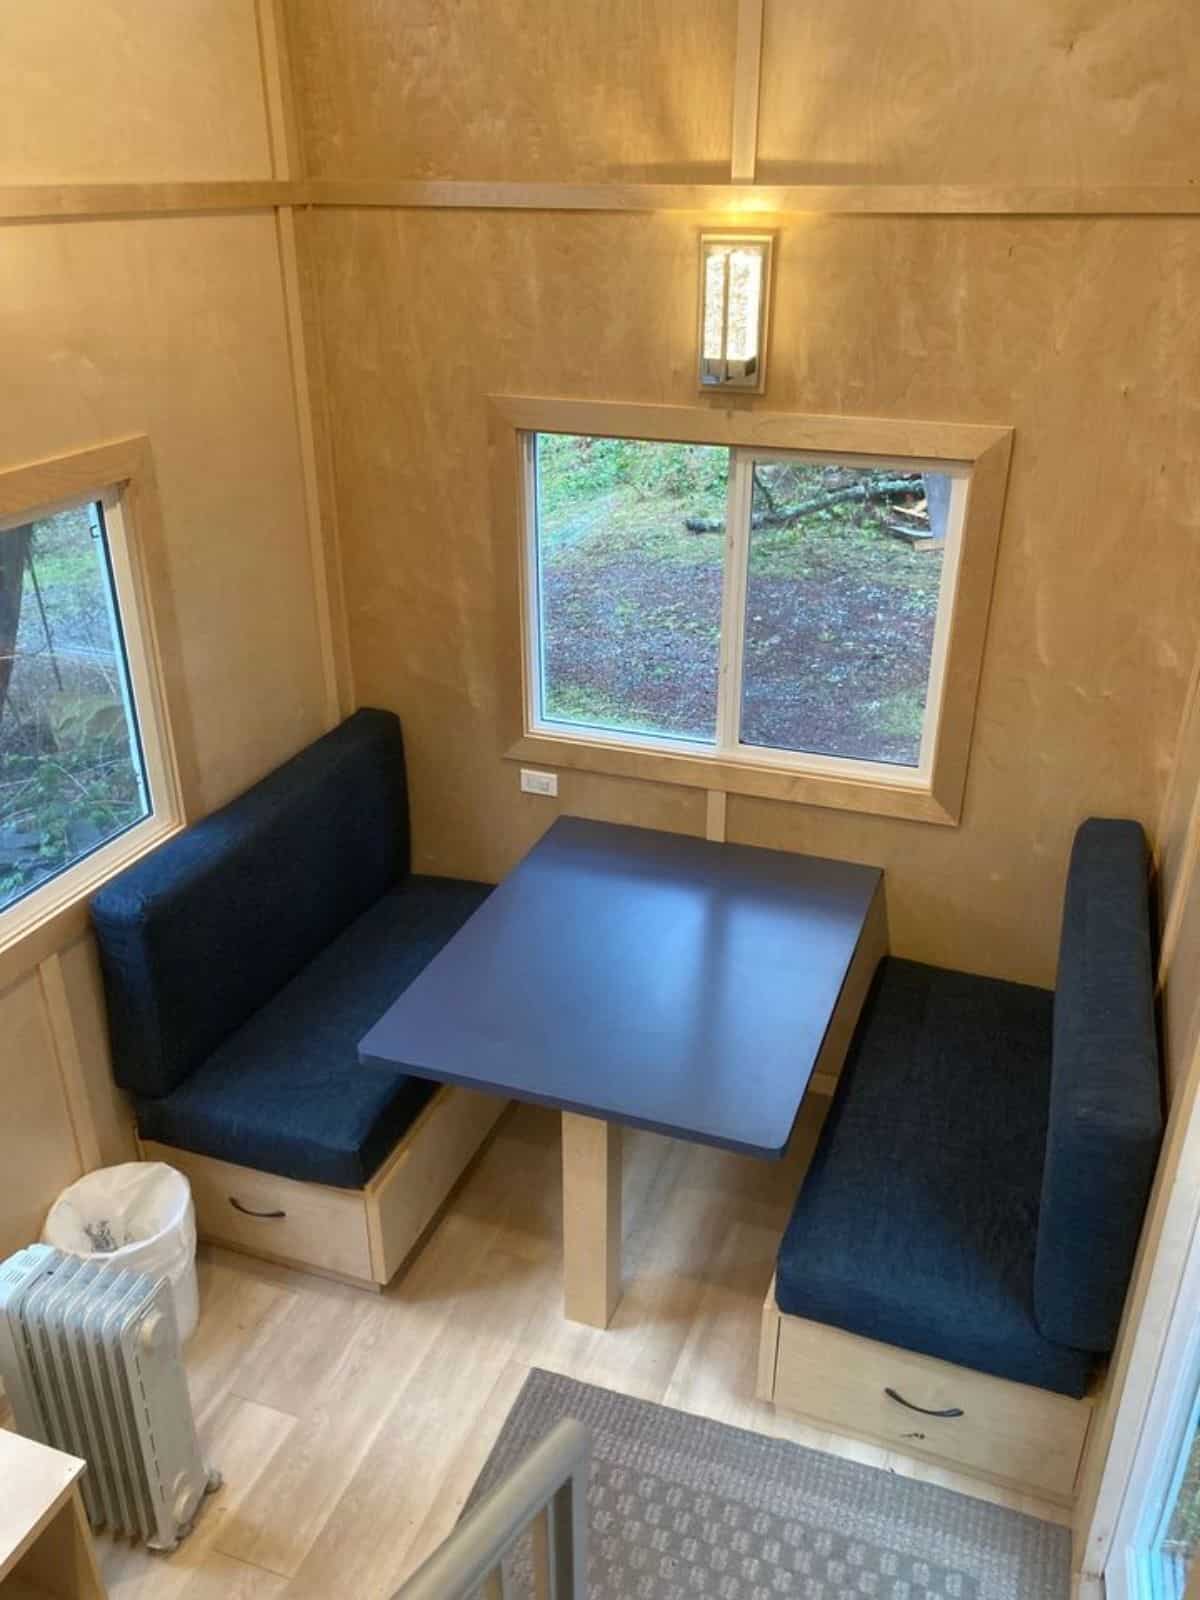 dining table with couch besides the window in living area